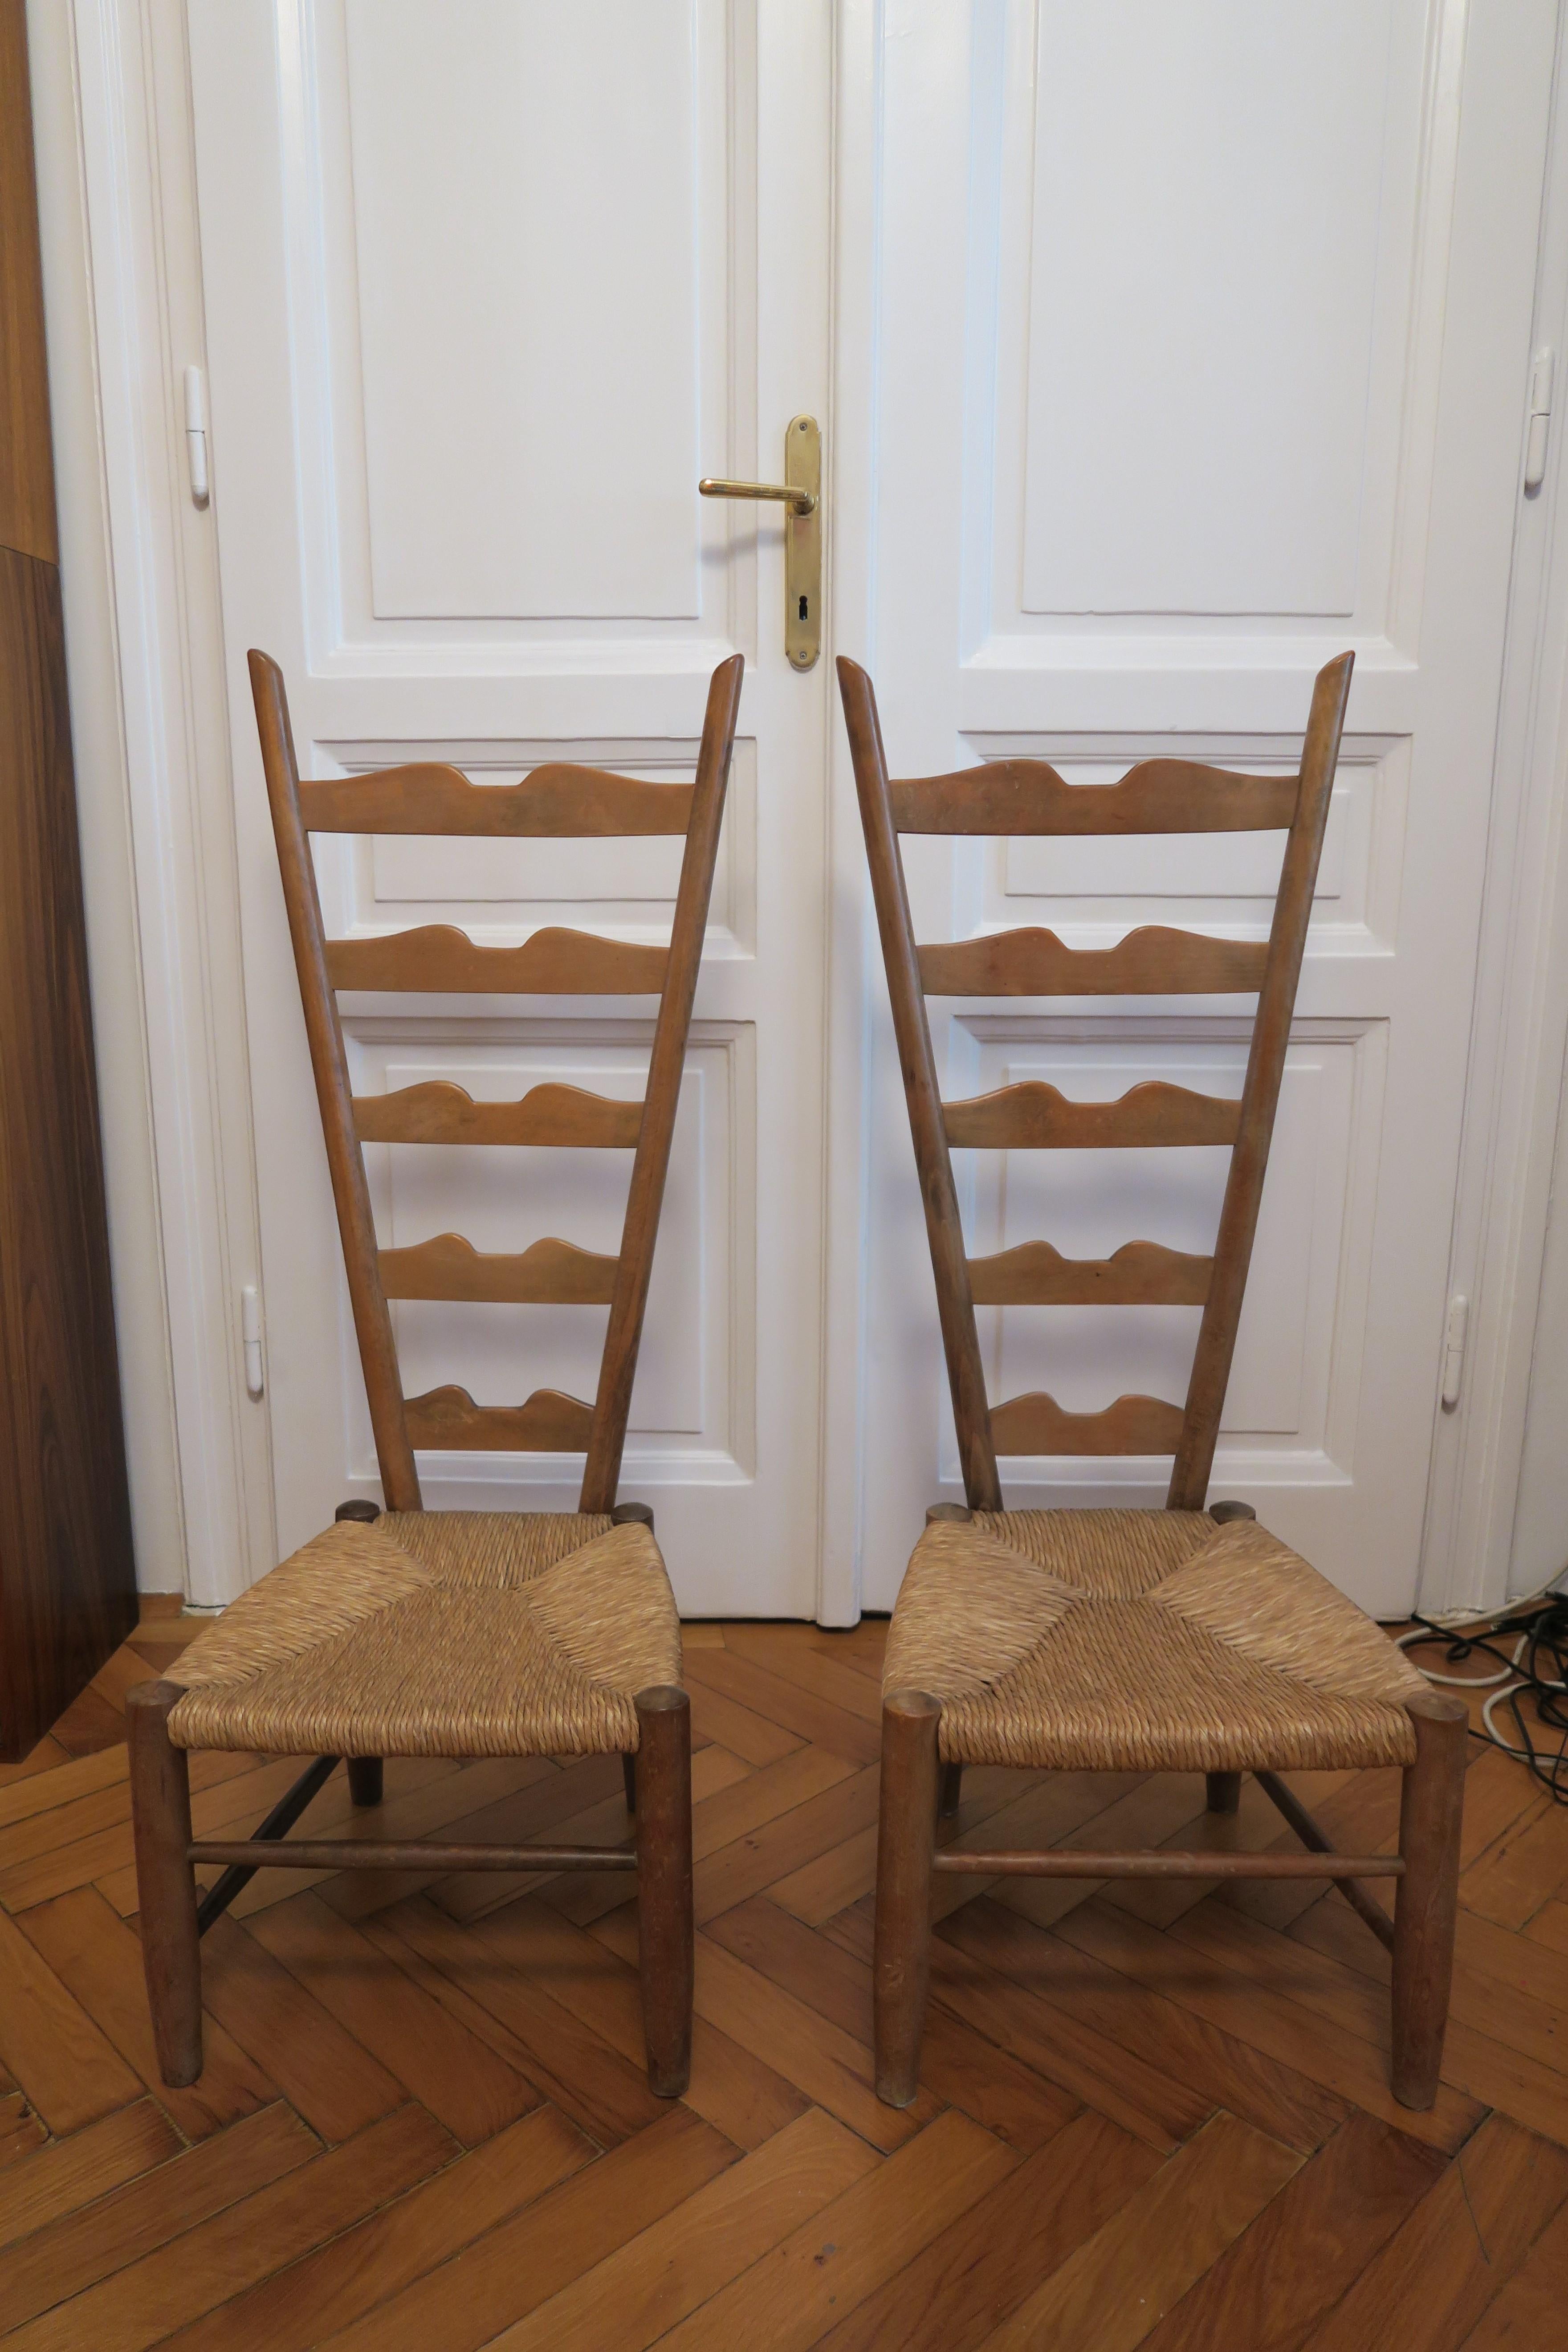 Hand-Crafted 1 of 15 Pair of Vintage Fireside Ladderback Chairs by Gio Ponti for Casa e Giard